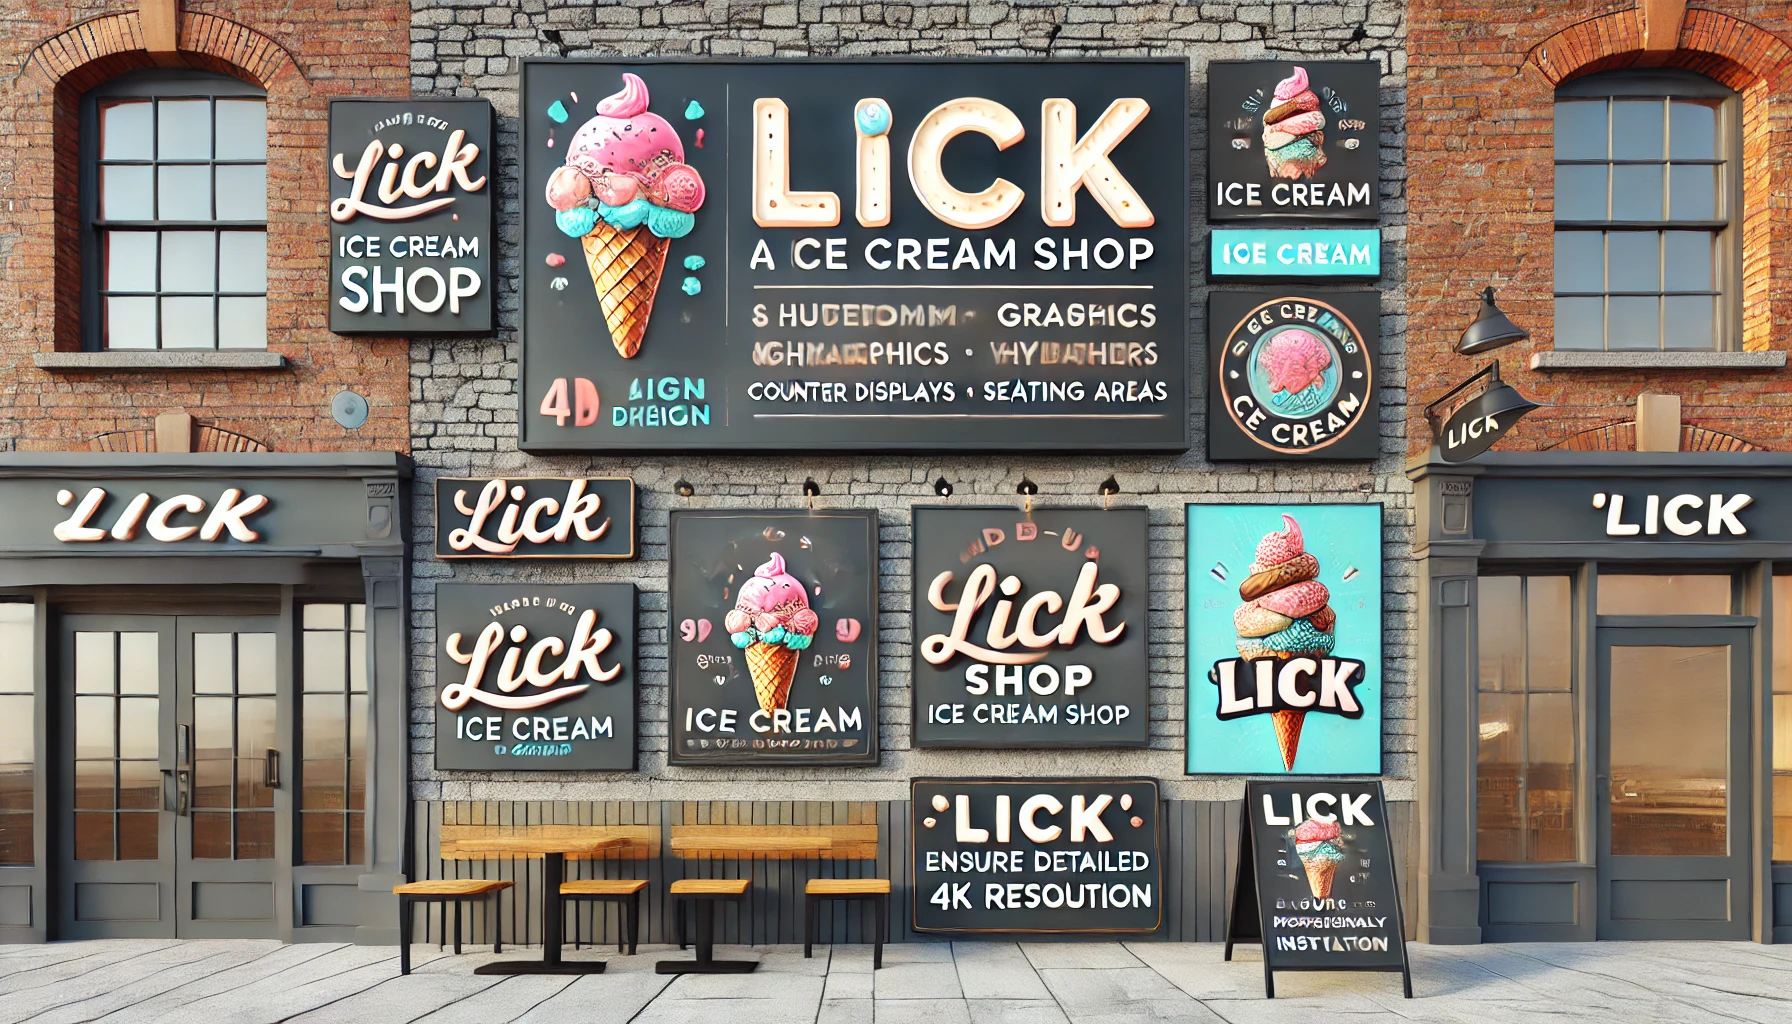 Sign design portfolio showcasing a variety of signage for a fictitious company, including storefront signs, directional signs, and promotional banners, demonstrating clear and attractive visual communication.